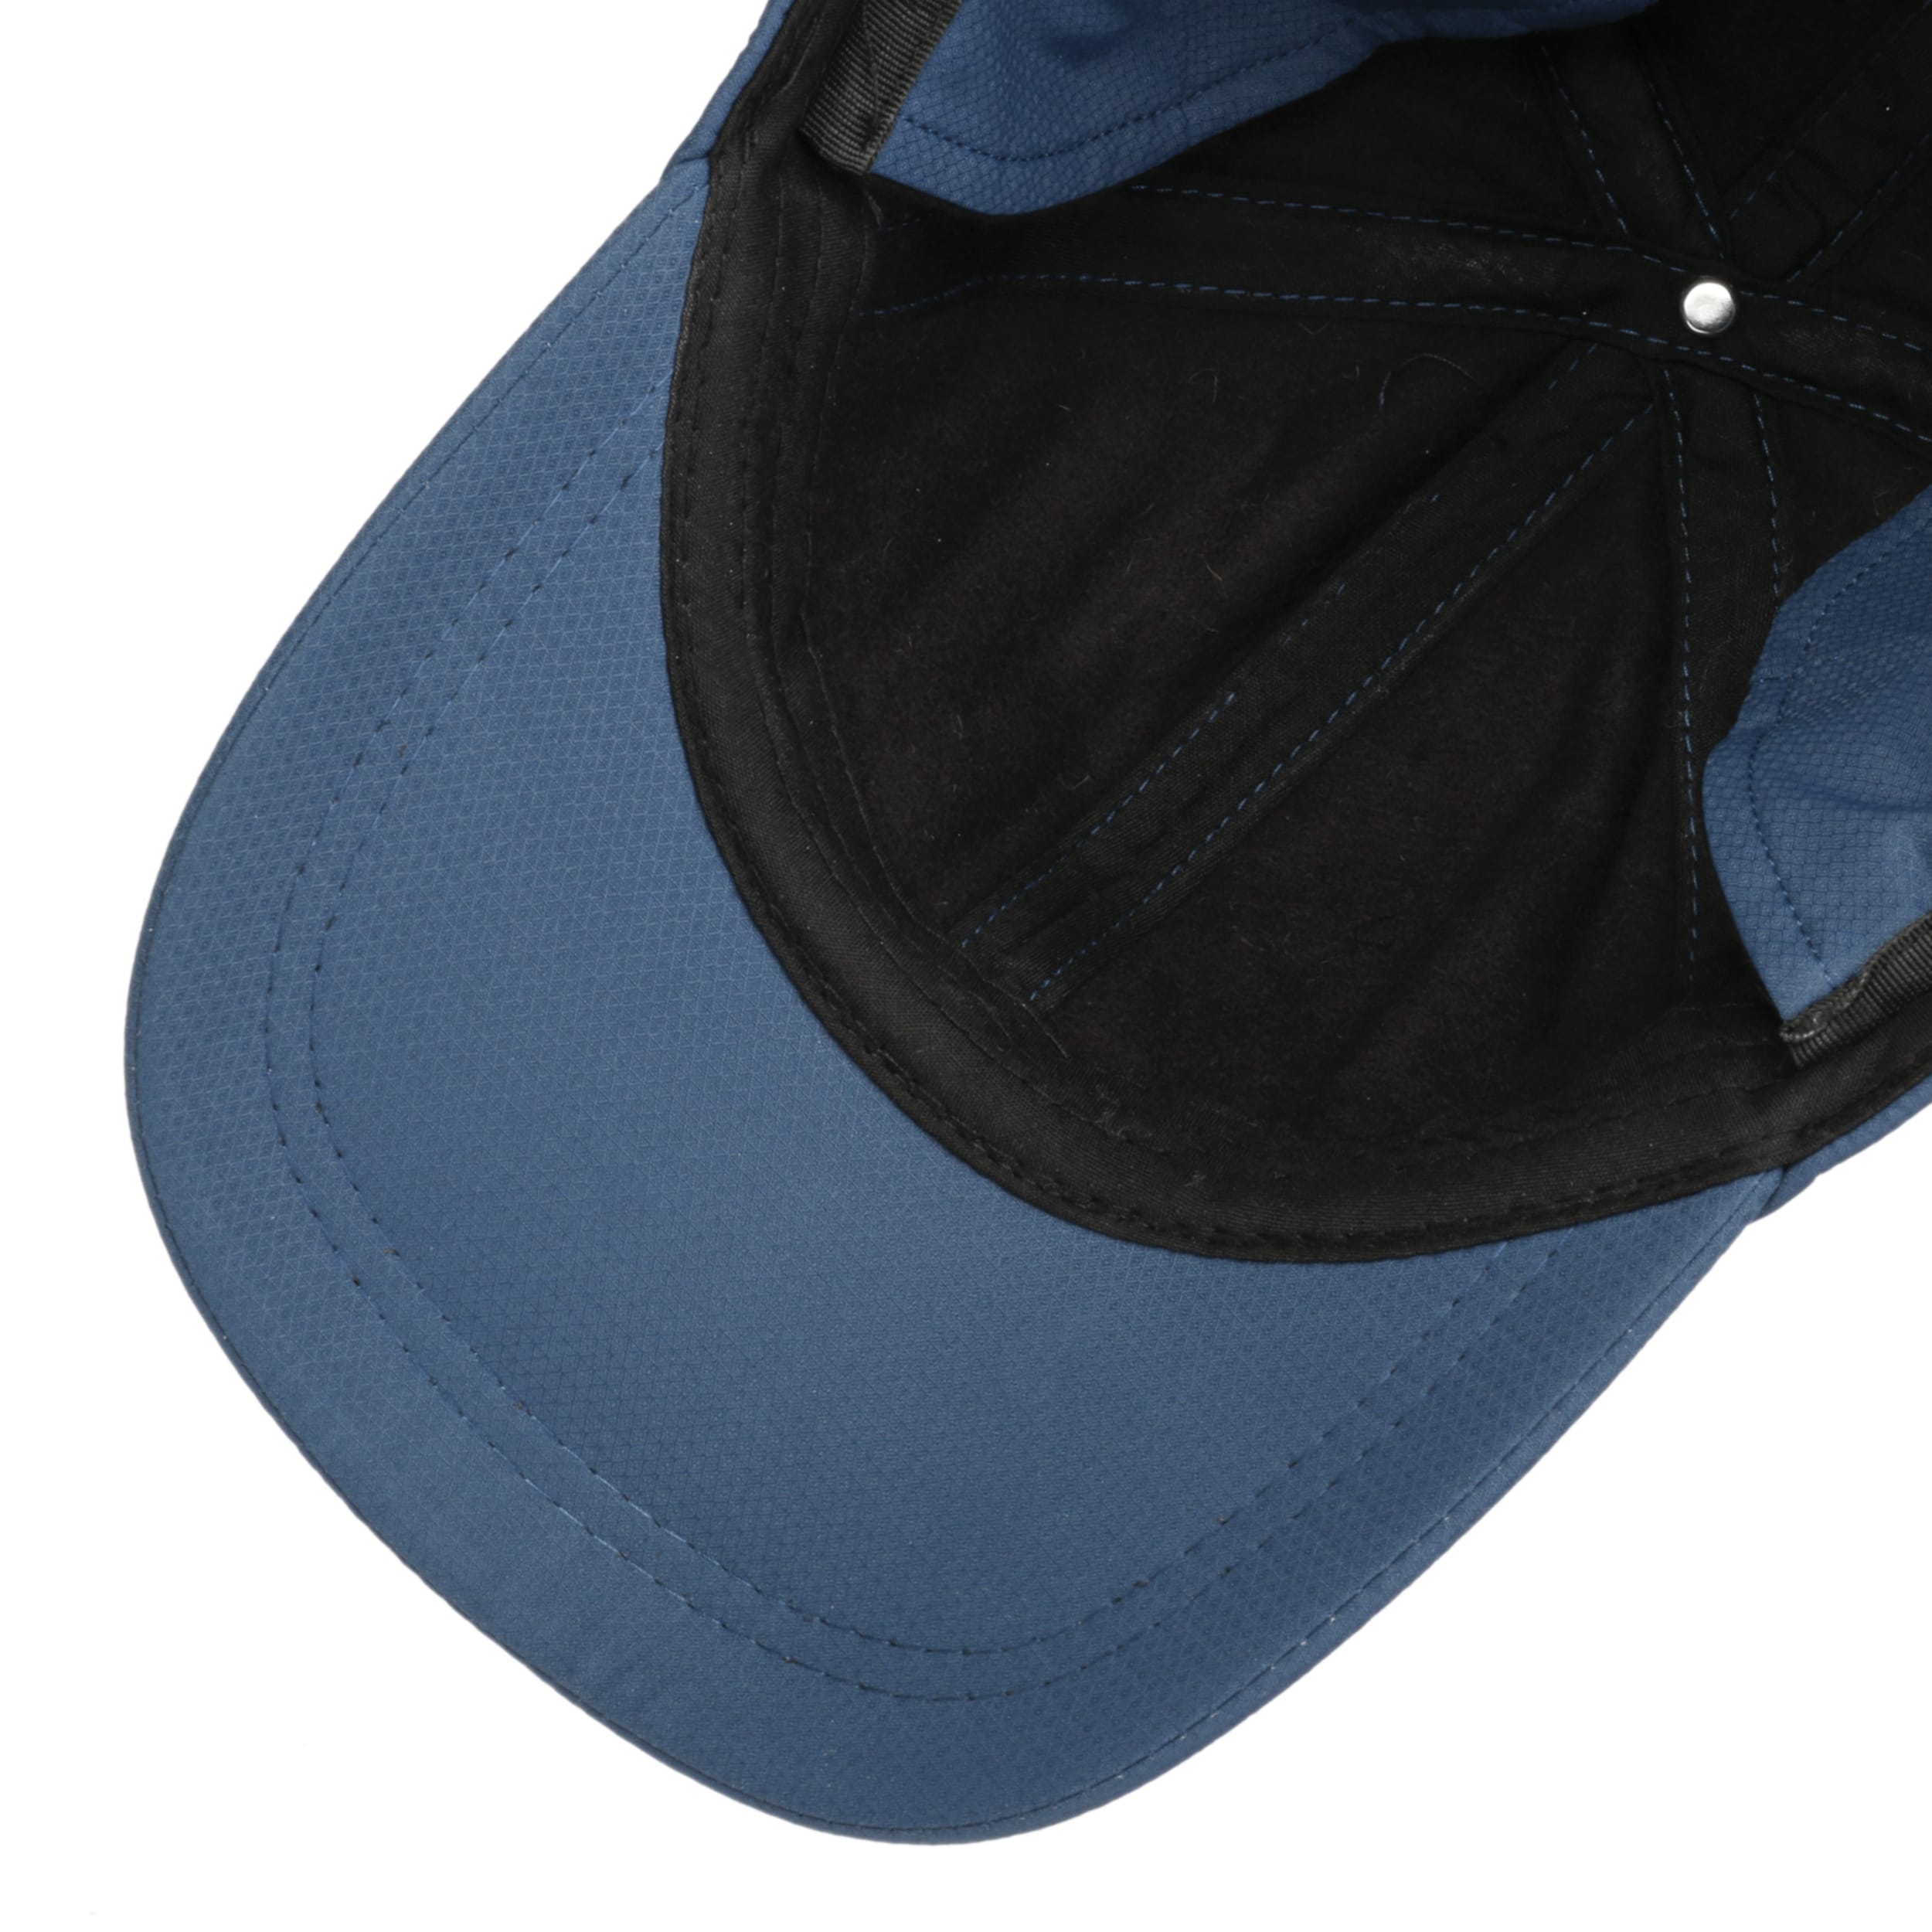 mit € Thinsulate Cap 3M - 29,95 by Lipodo Ohrenklappen